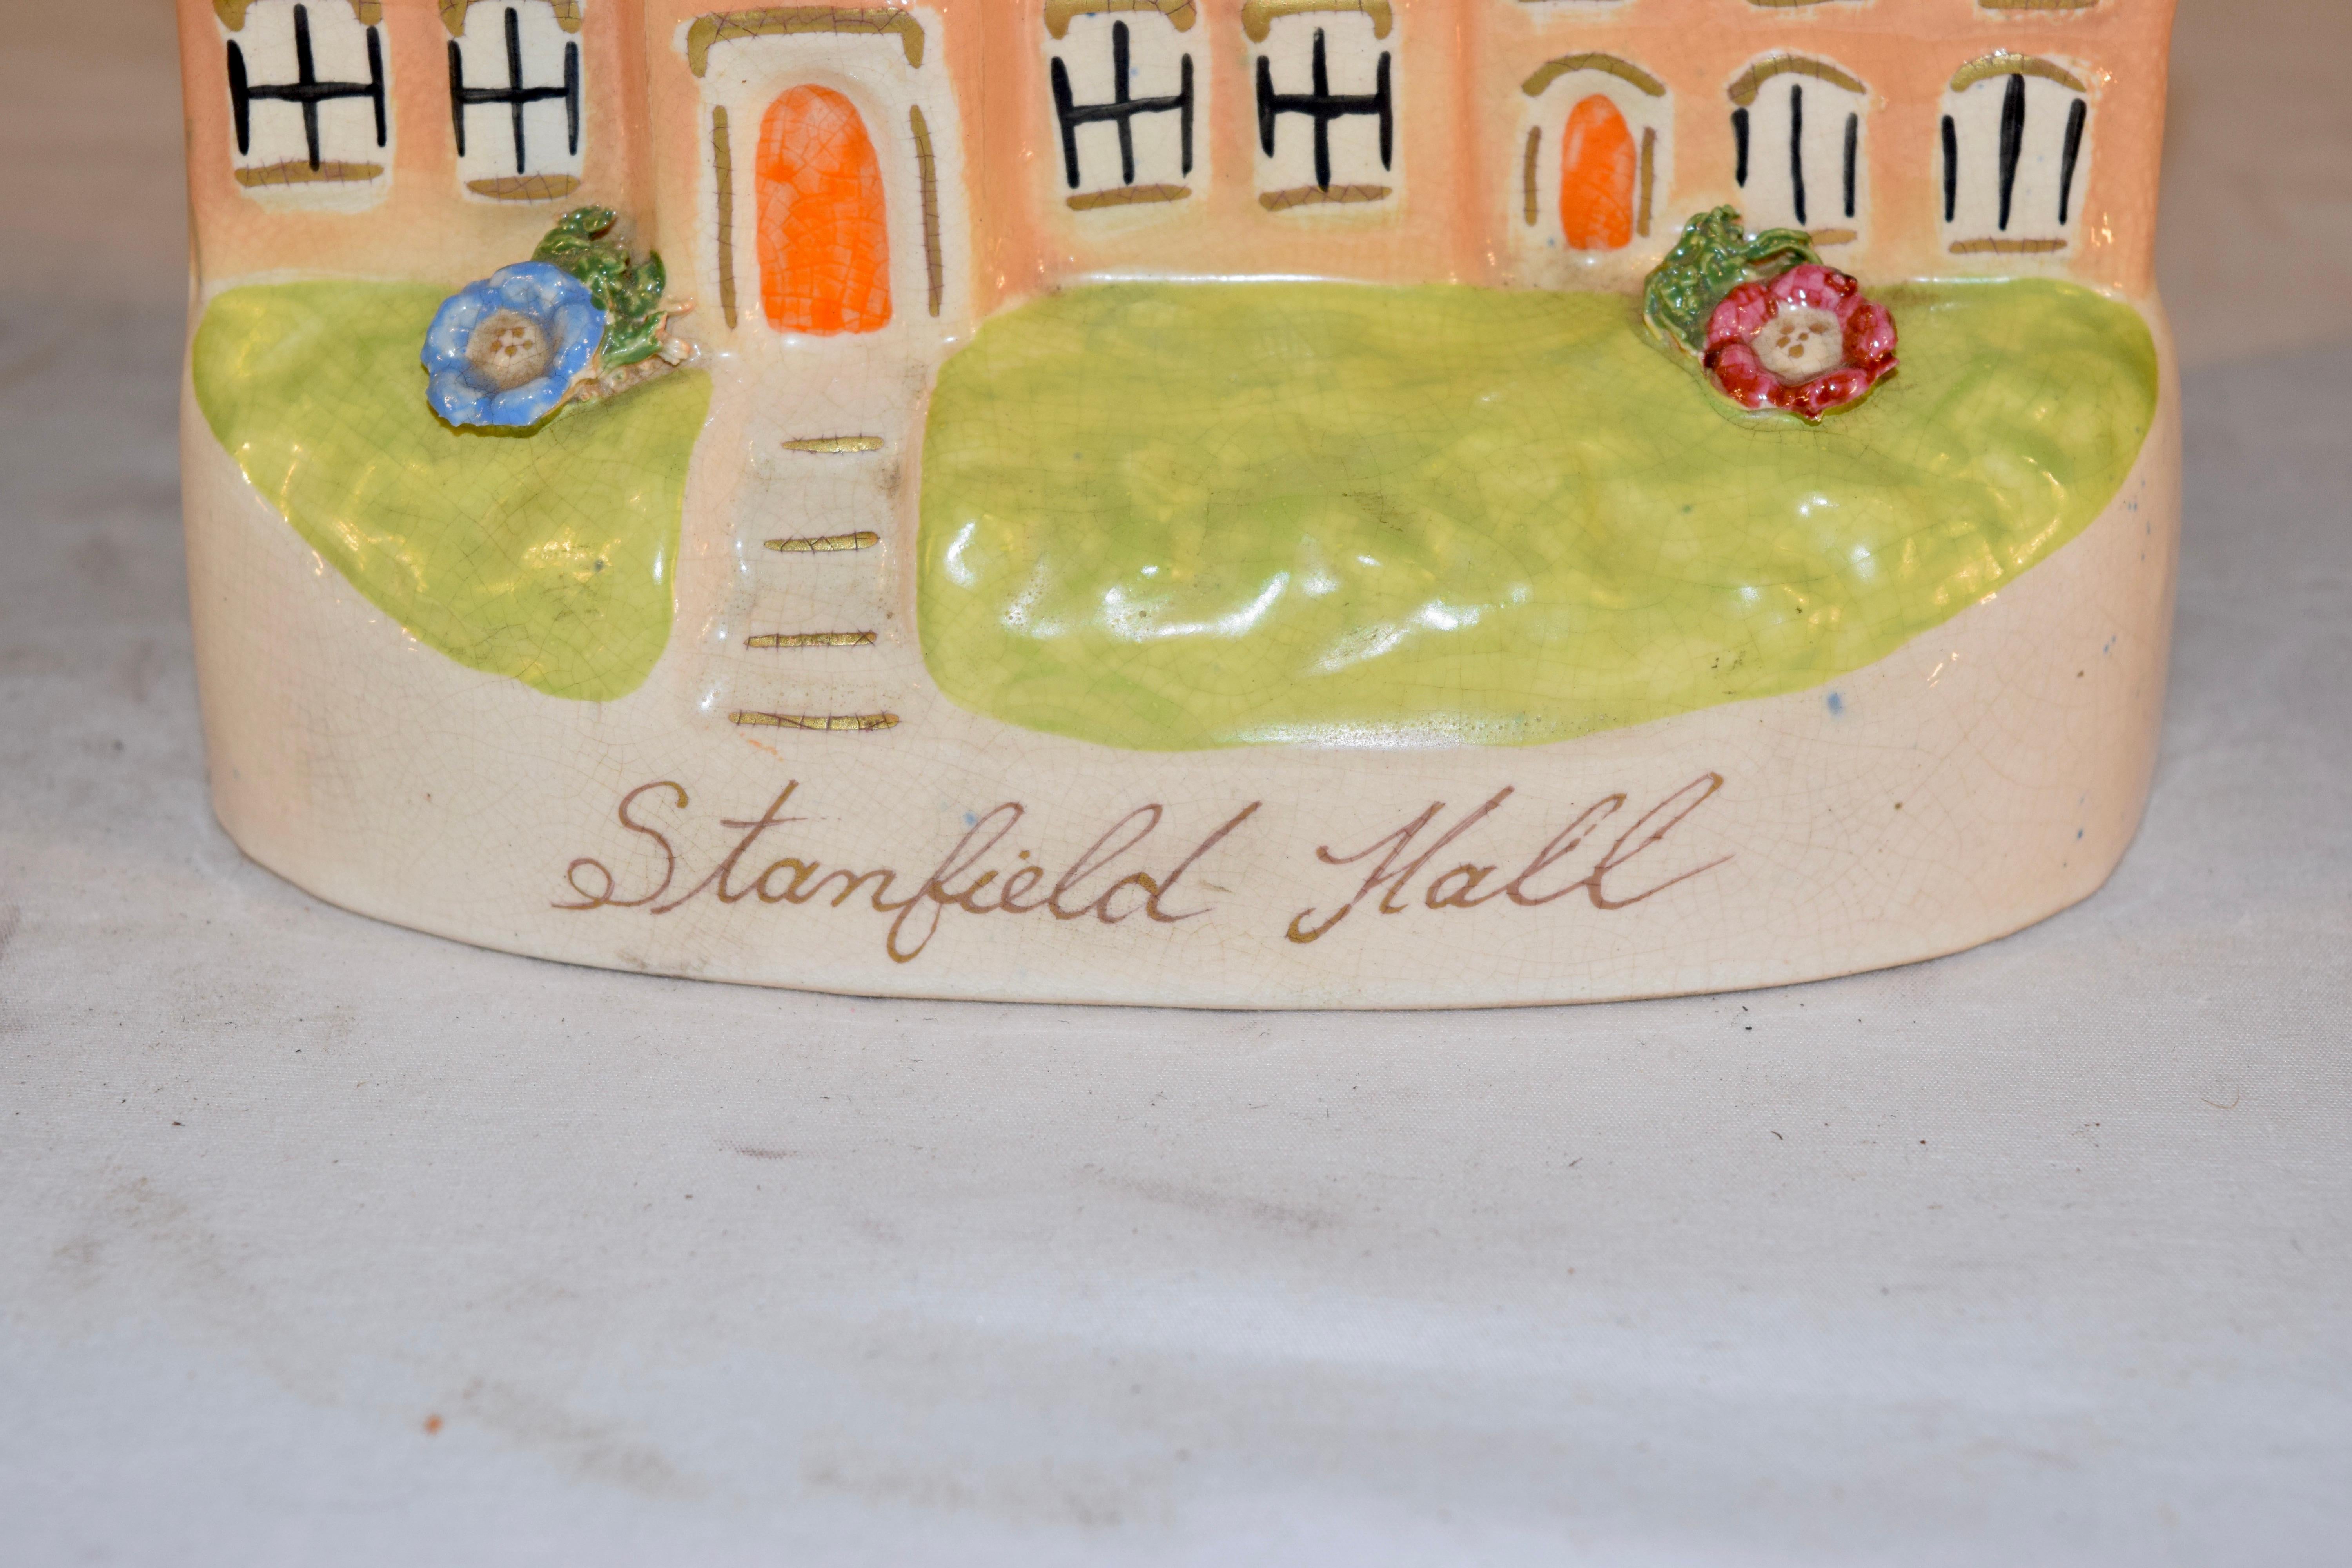 19th century Staffordshire pottery house model of Stanfield Hall. These models were made in the mid-19th century to commemorate a famous double murder which occurred in 1848. The house was built in the 13th century, and still stands today in Norfolk.